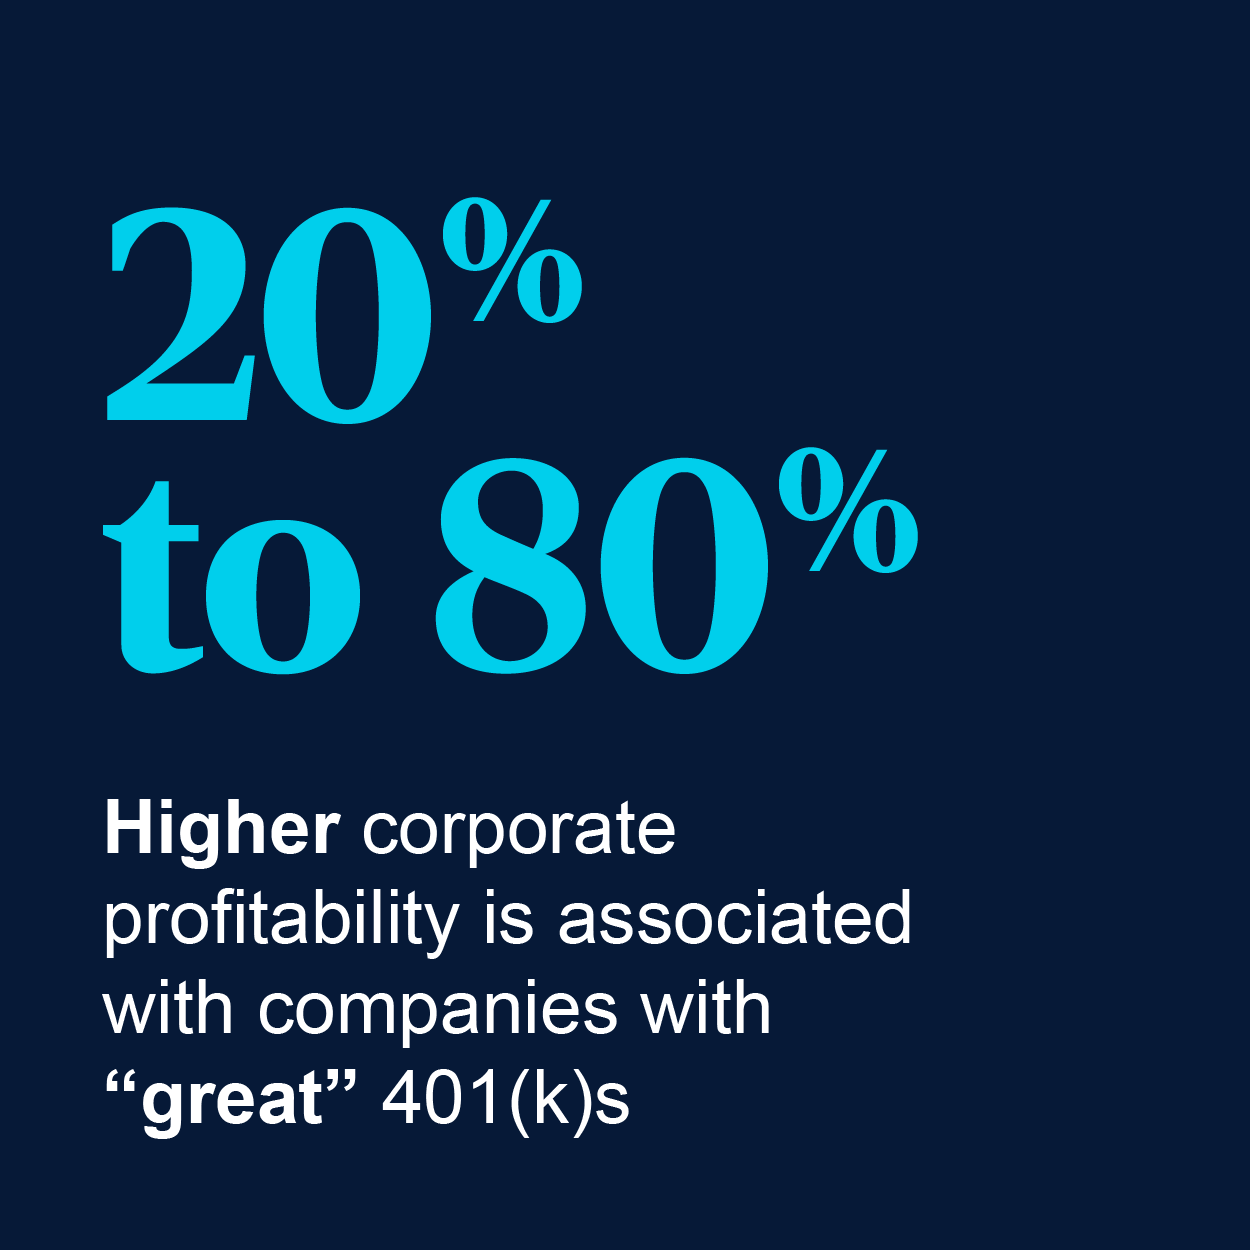 20%-80% Higher corporate profitability is associated with companies with "great" 401(k)s